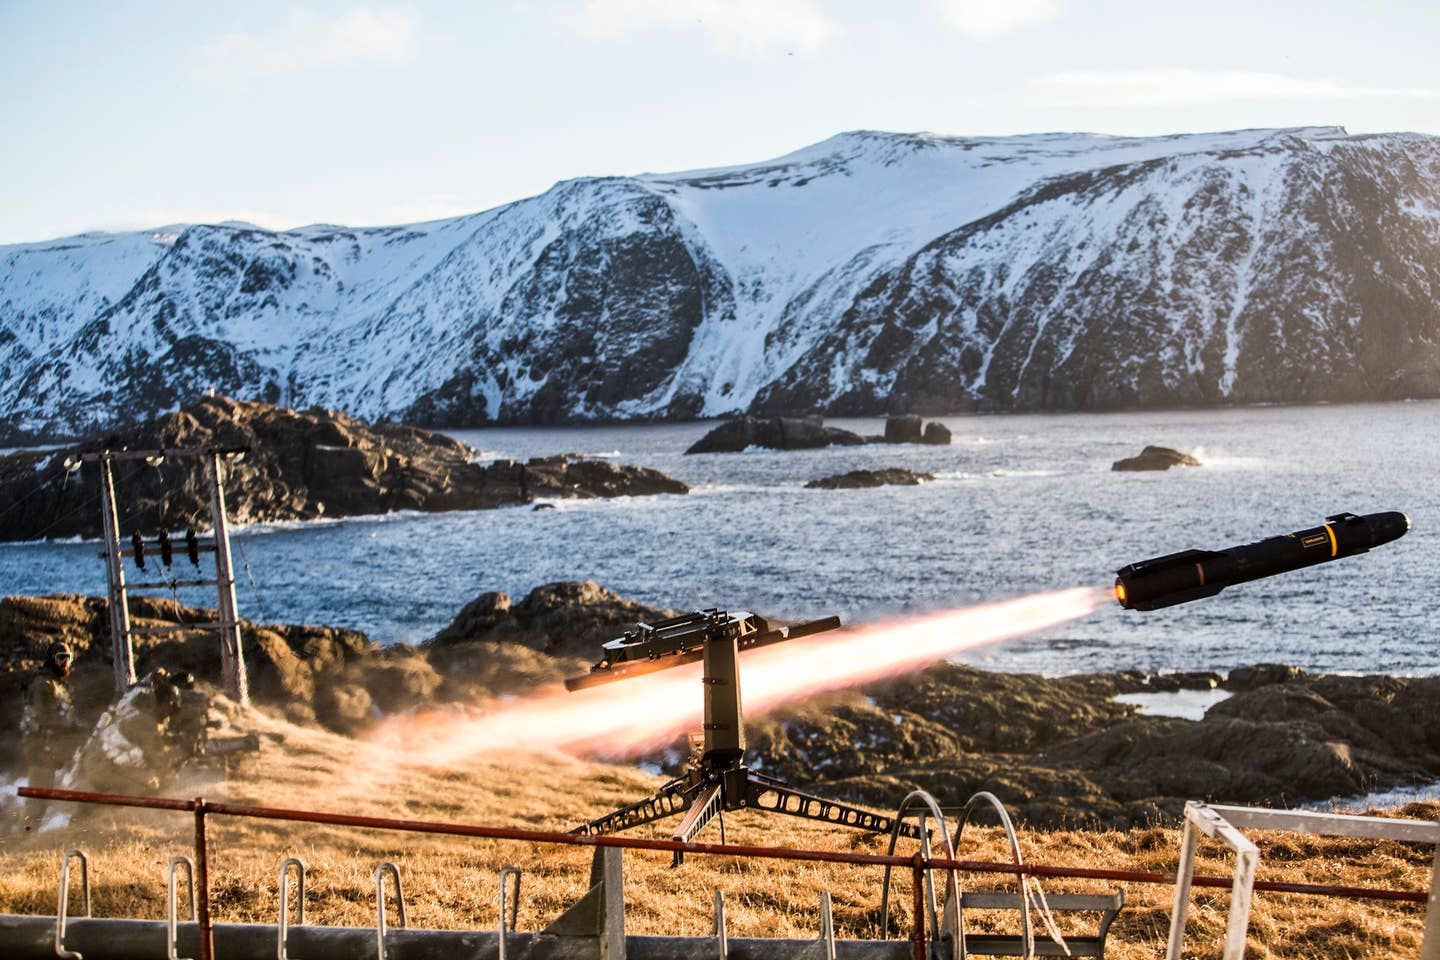 Hellfire missile launch from a ground-based launcher. <em>Credit: Norway Ministry of Defense</em>